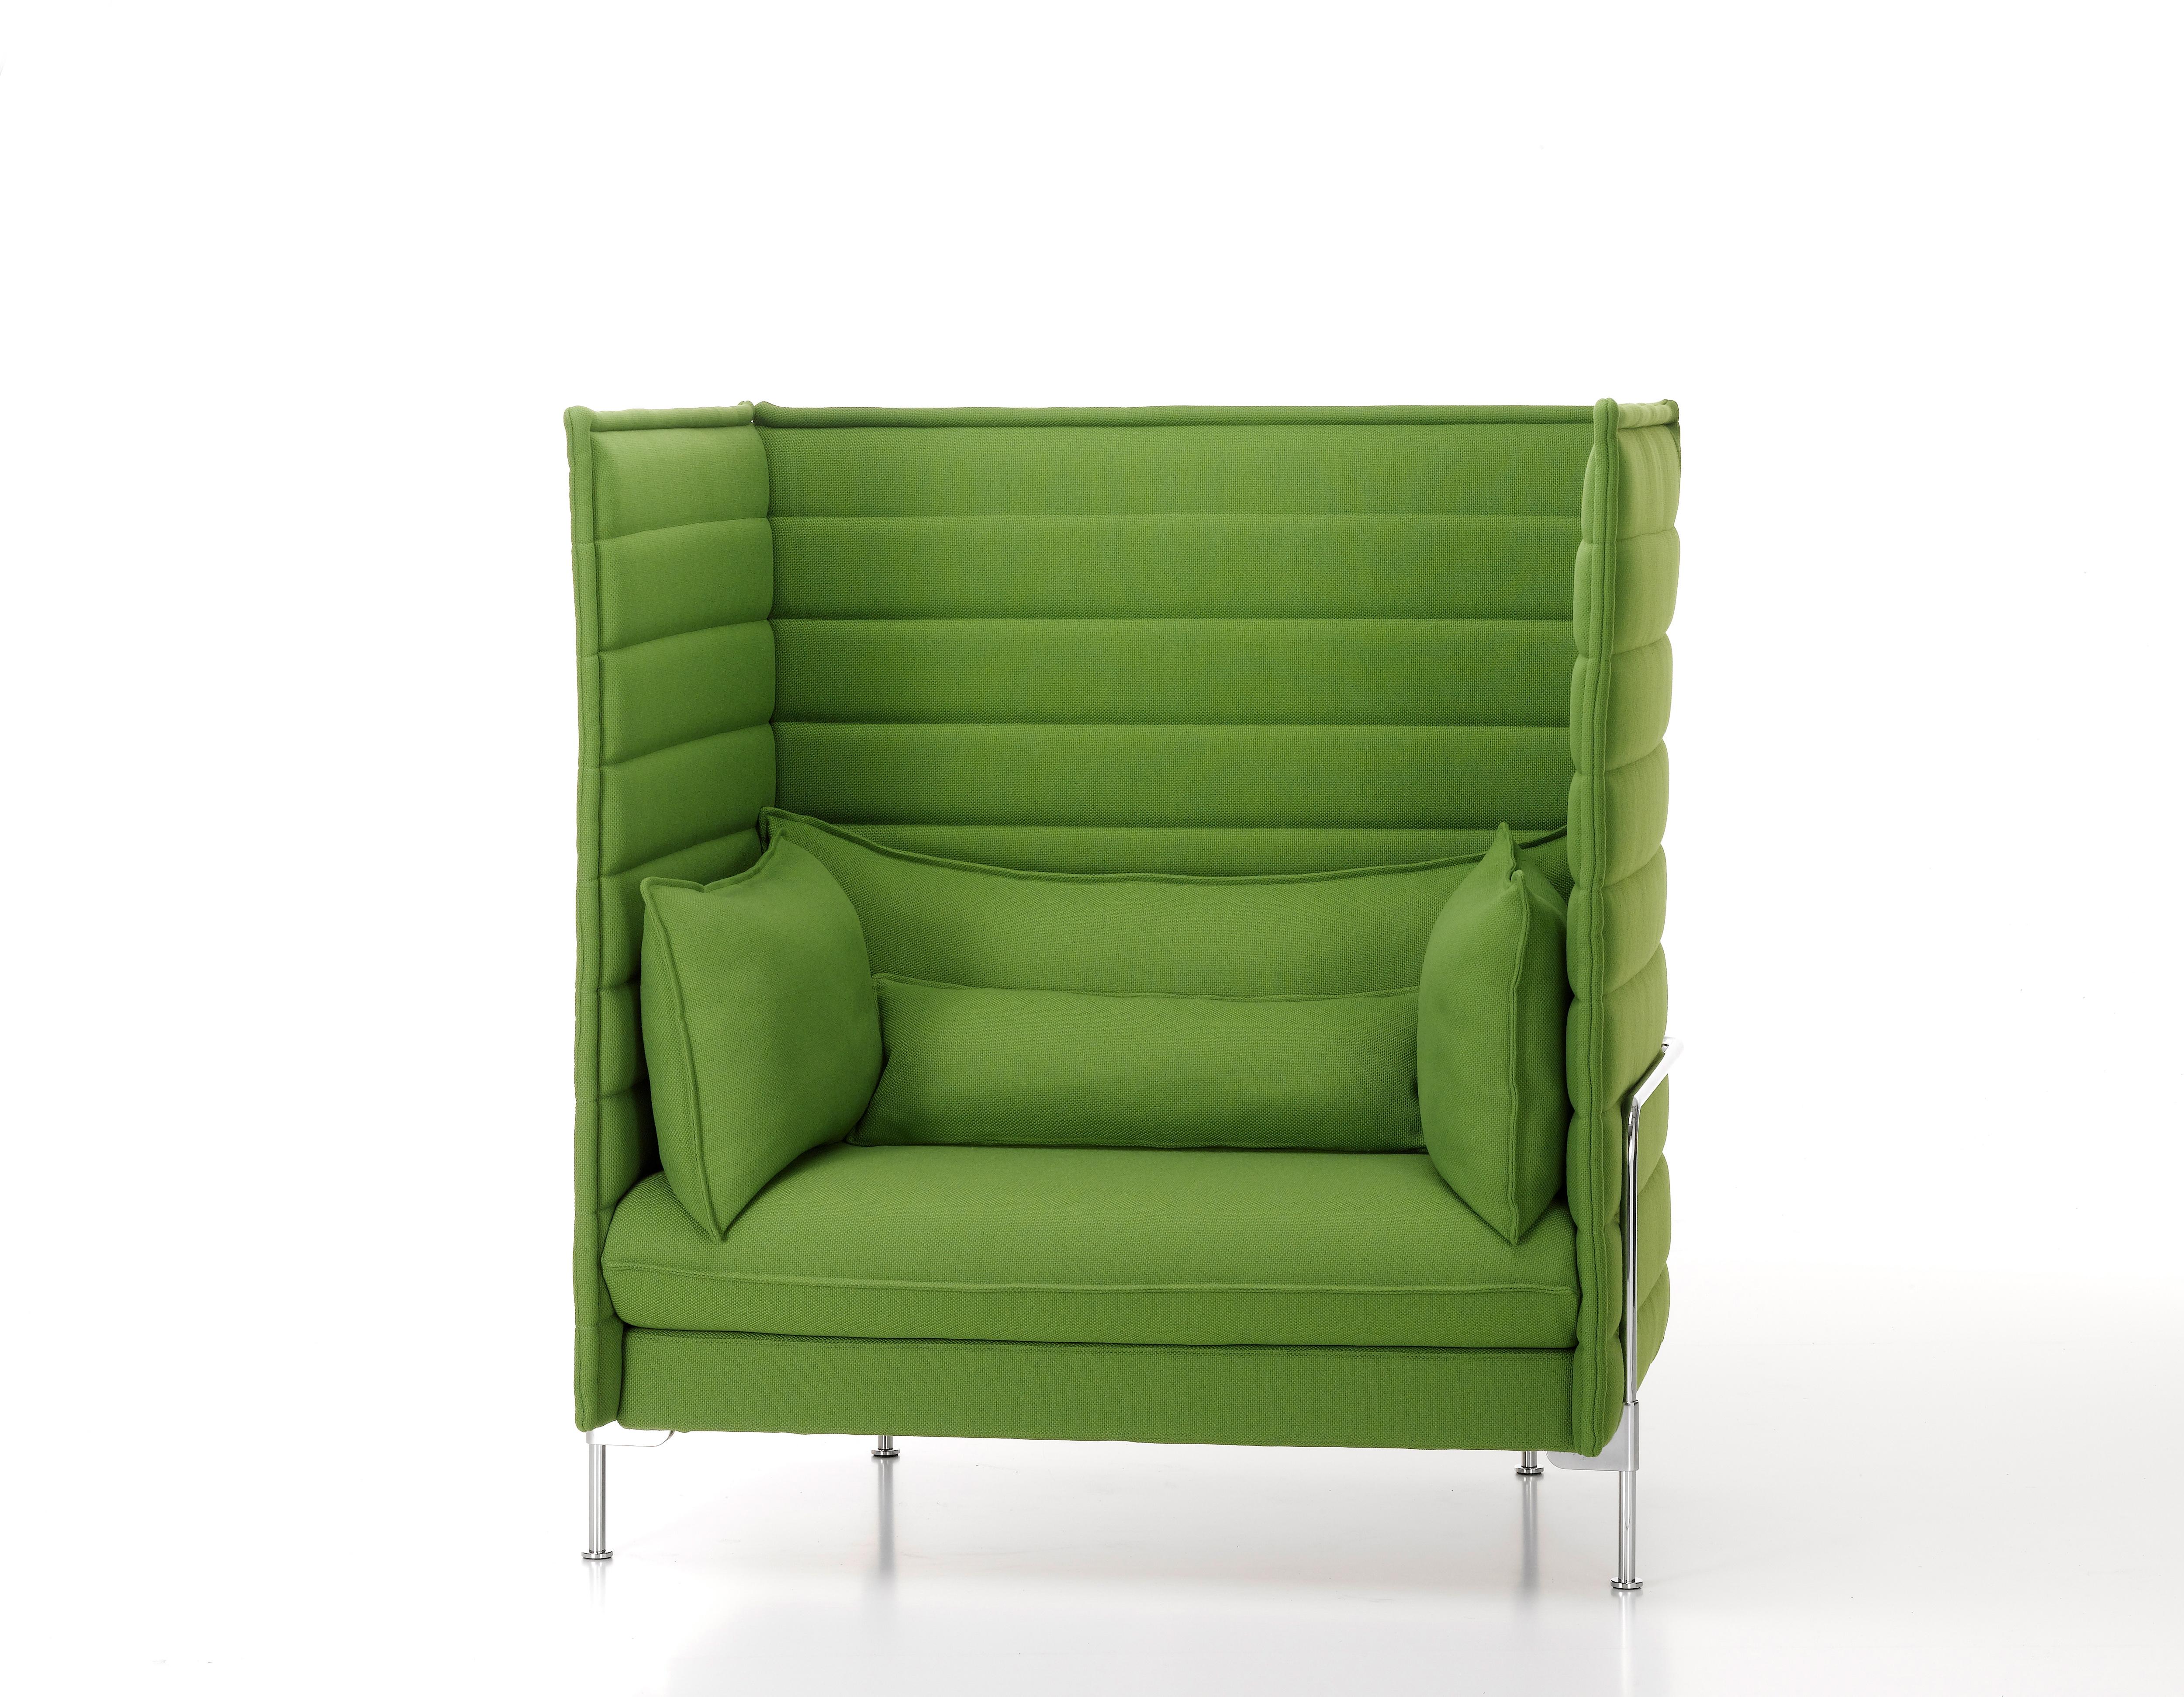 These products are only available in the United States.

A loveseat can go beyond being a mere piece of furniture to become a room within a room. This was the idea that inspired Ronan and Erwan Bouroullec in their design of the Alcove loveseat. With